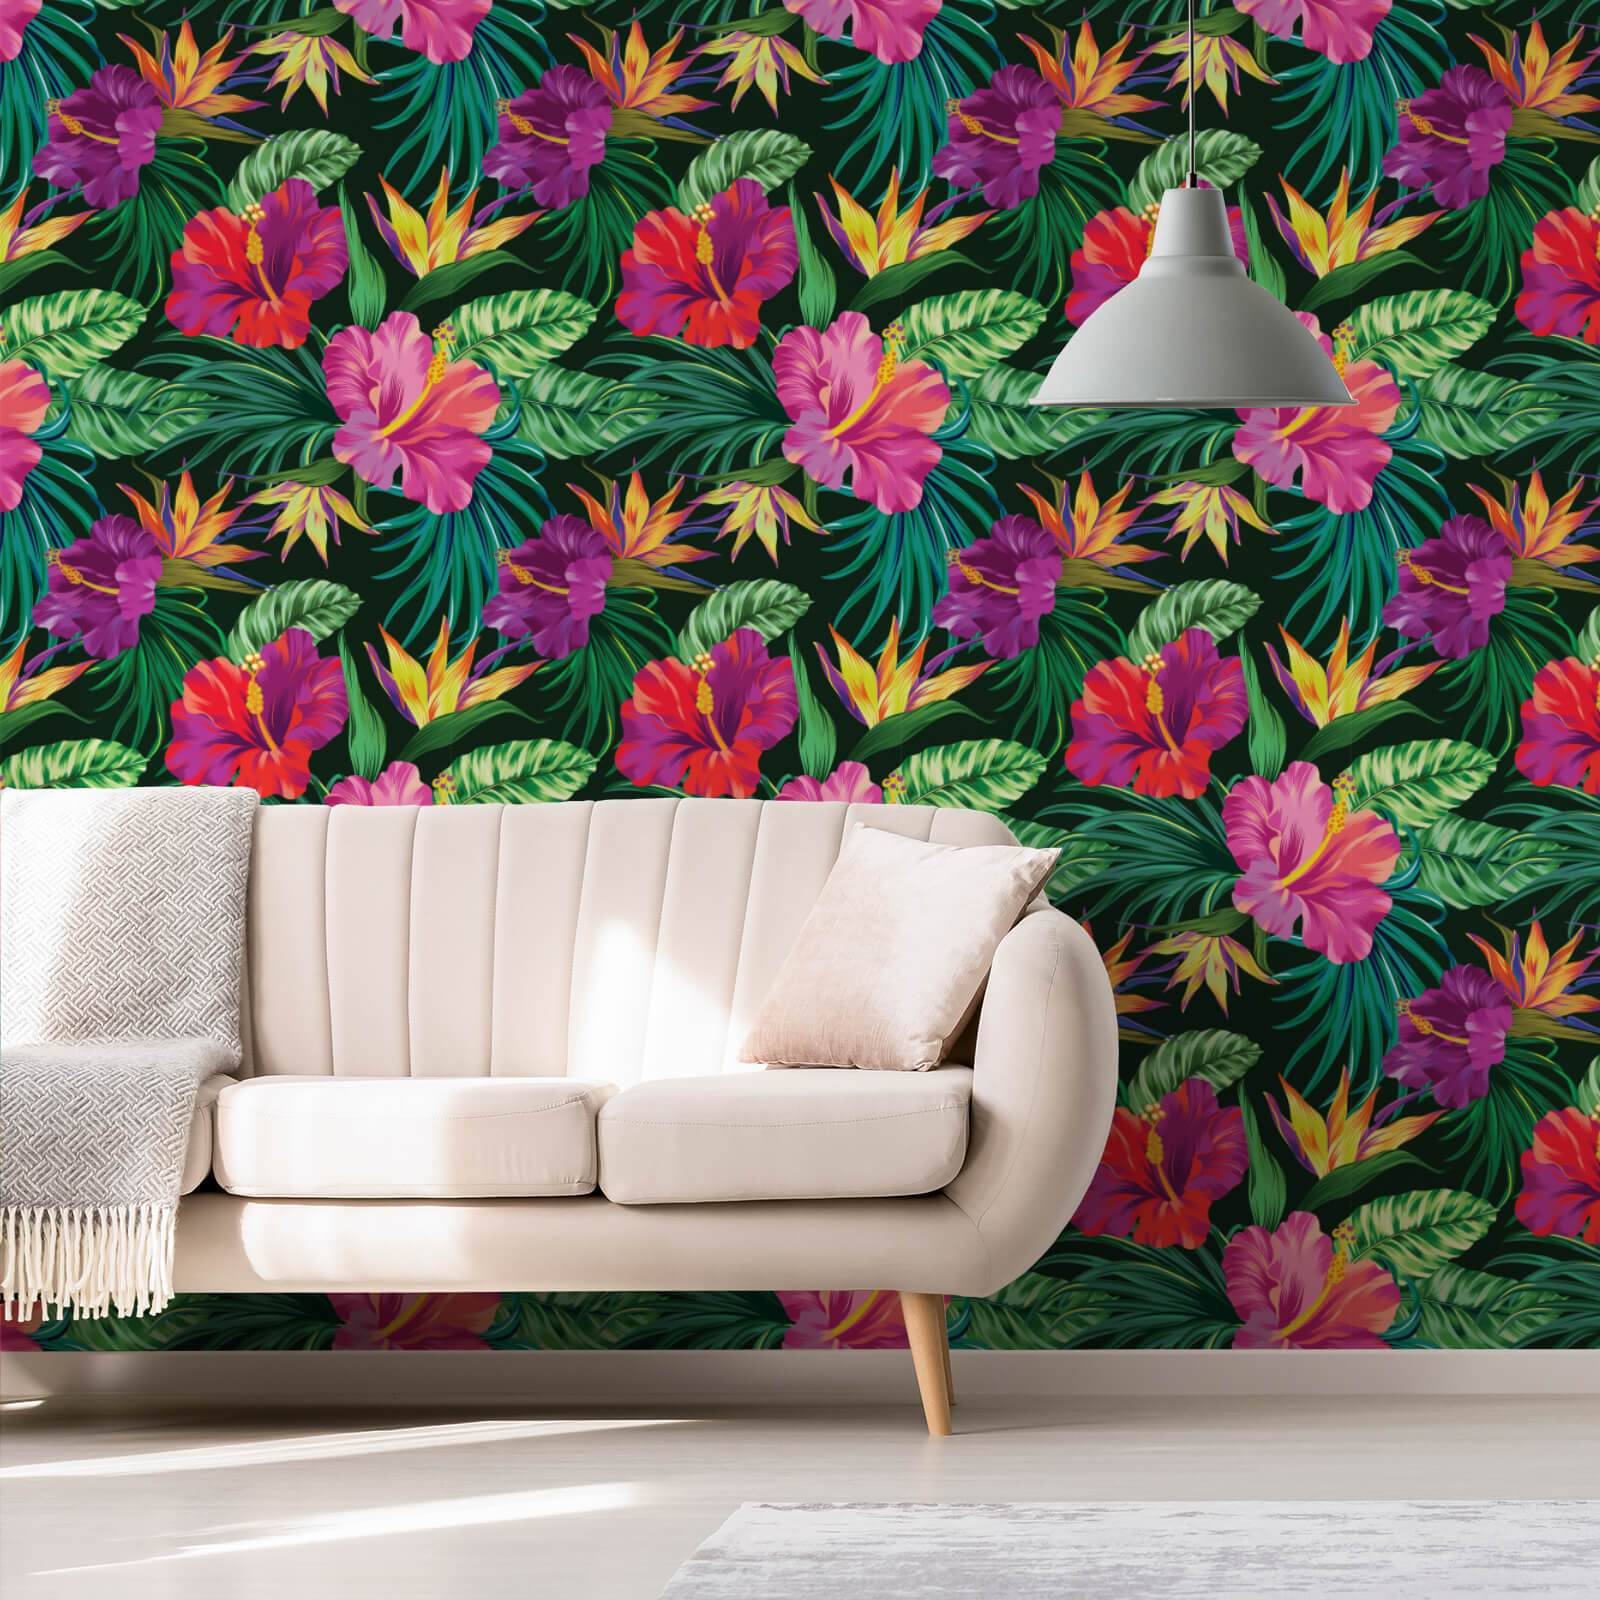 Removable Wallpaper Peel and Stick Wallpaper Wall Paper Wall  Tropica   ONDECORCOM